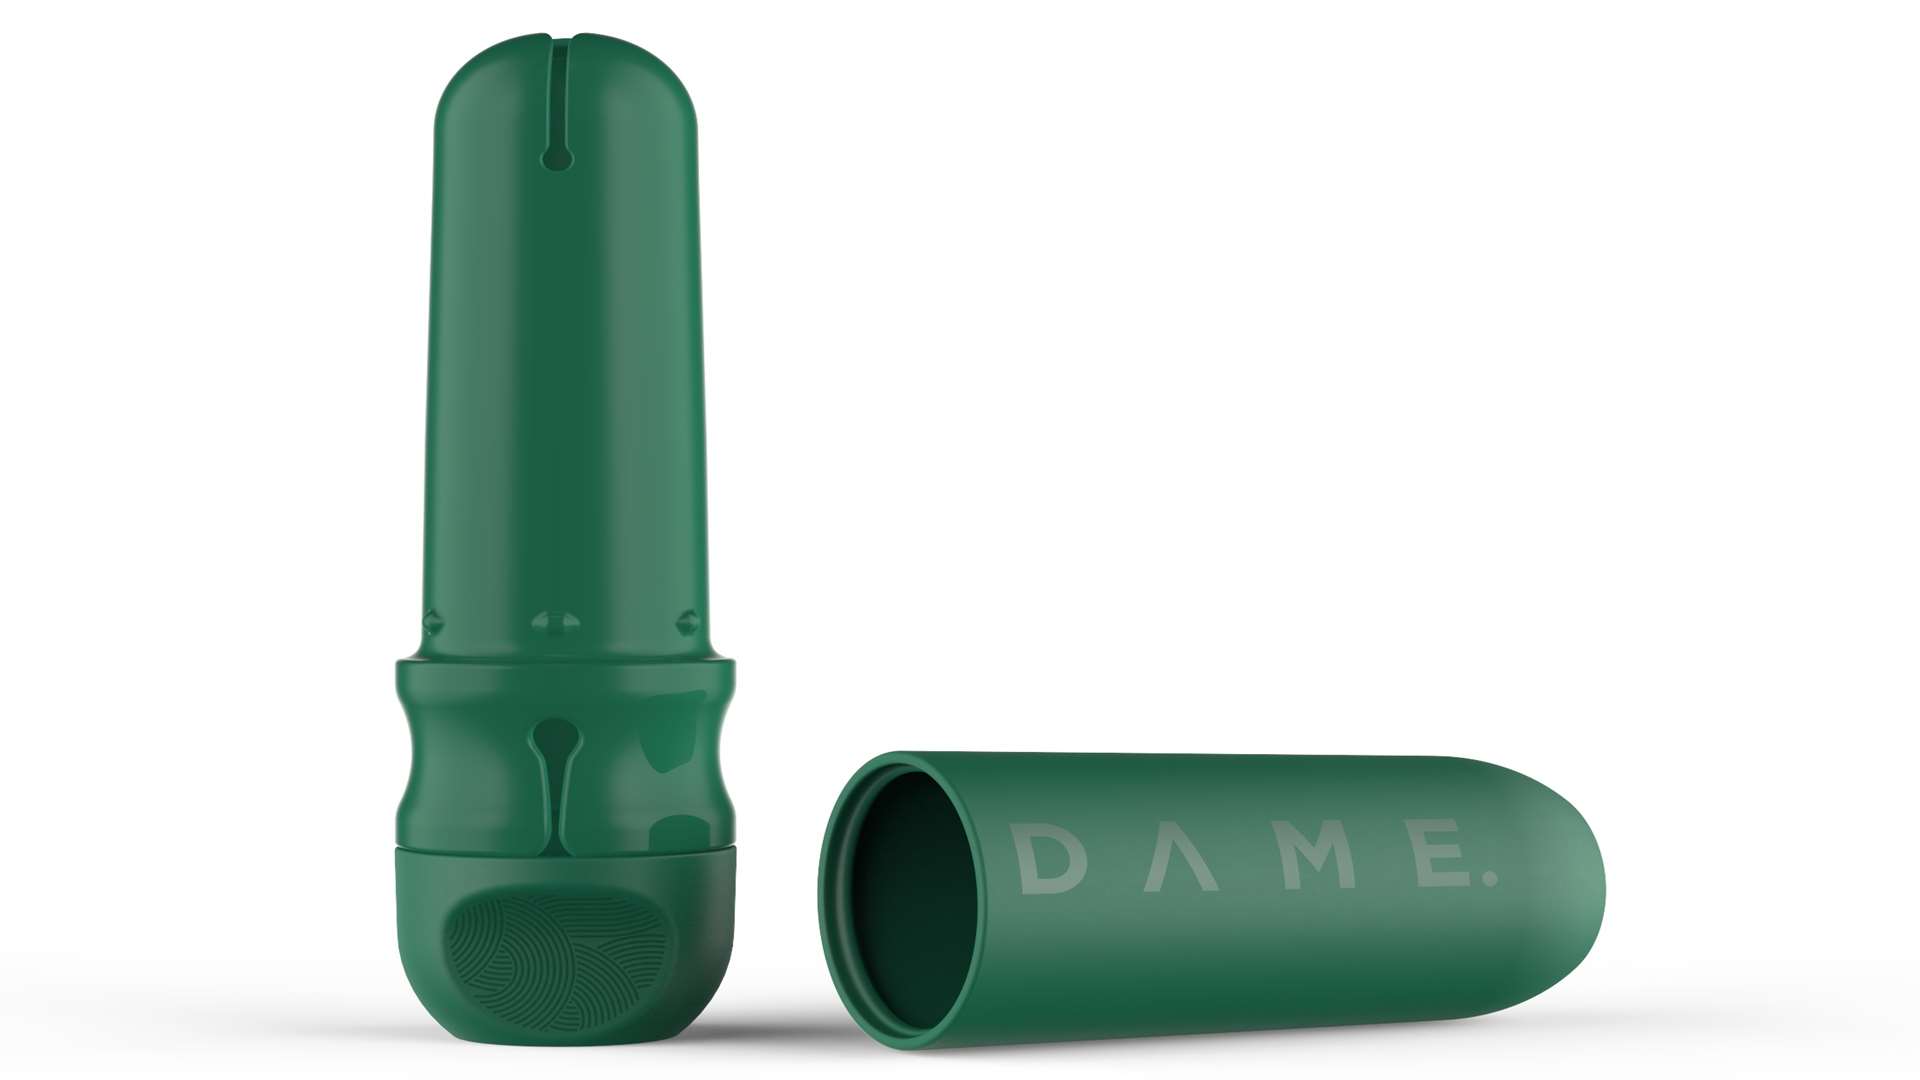 The reusable tampon applicator was developed by DAME and Ashford-based ITL Group